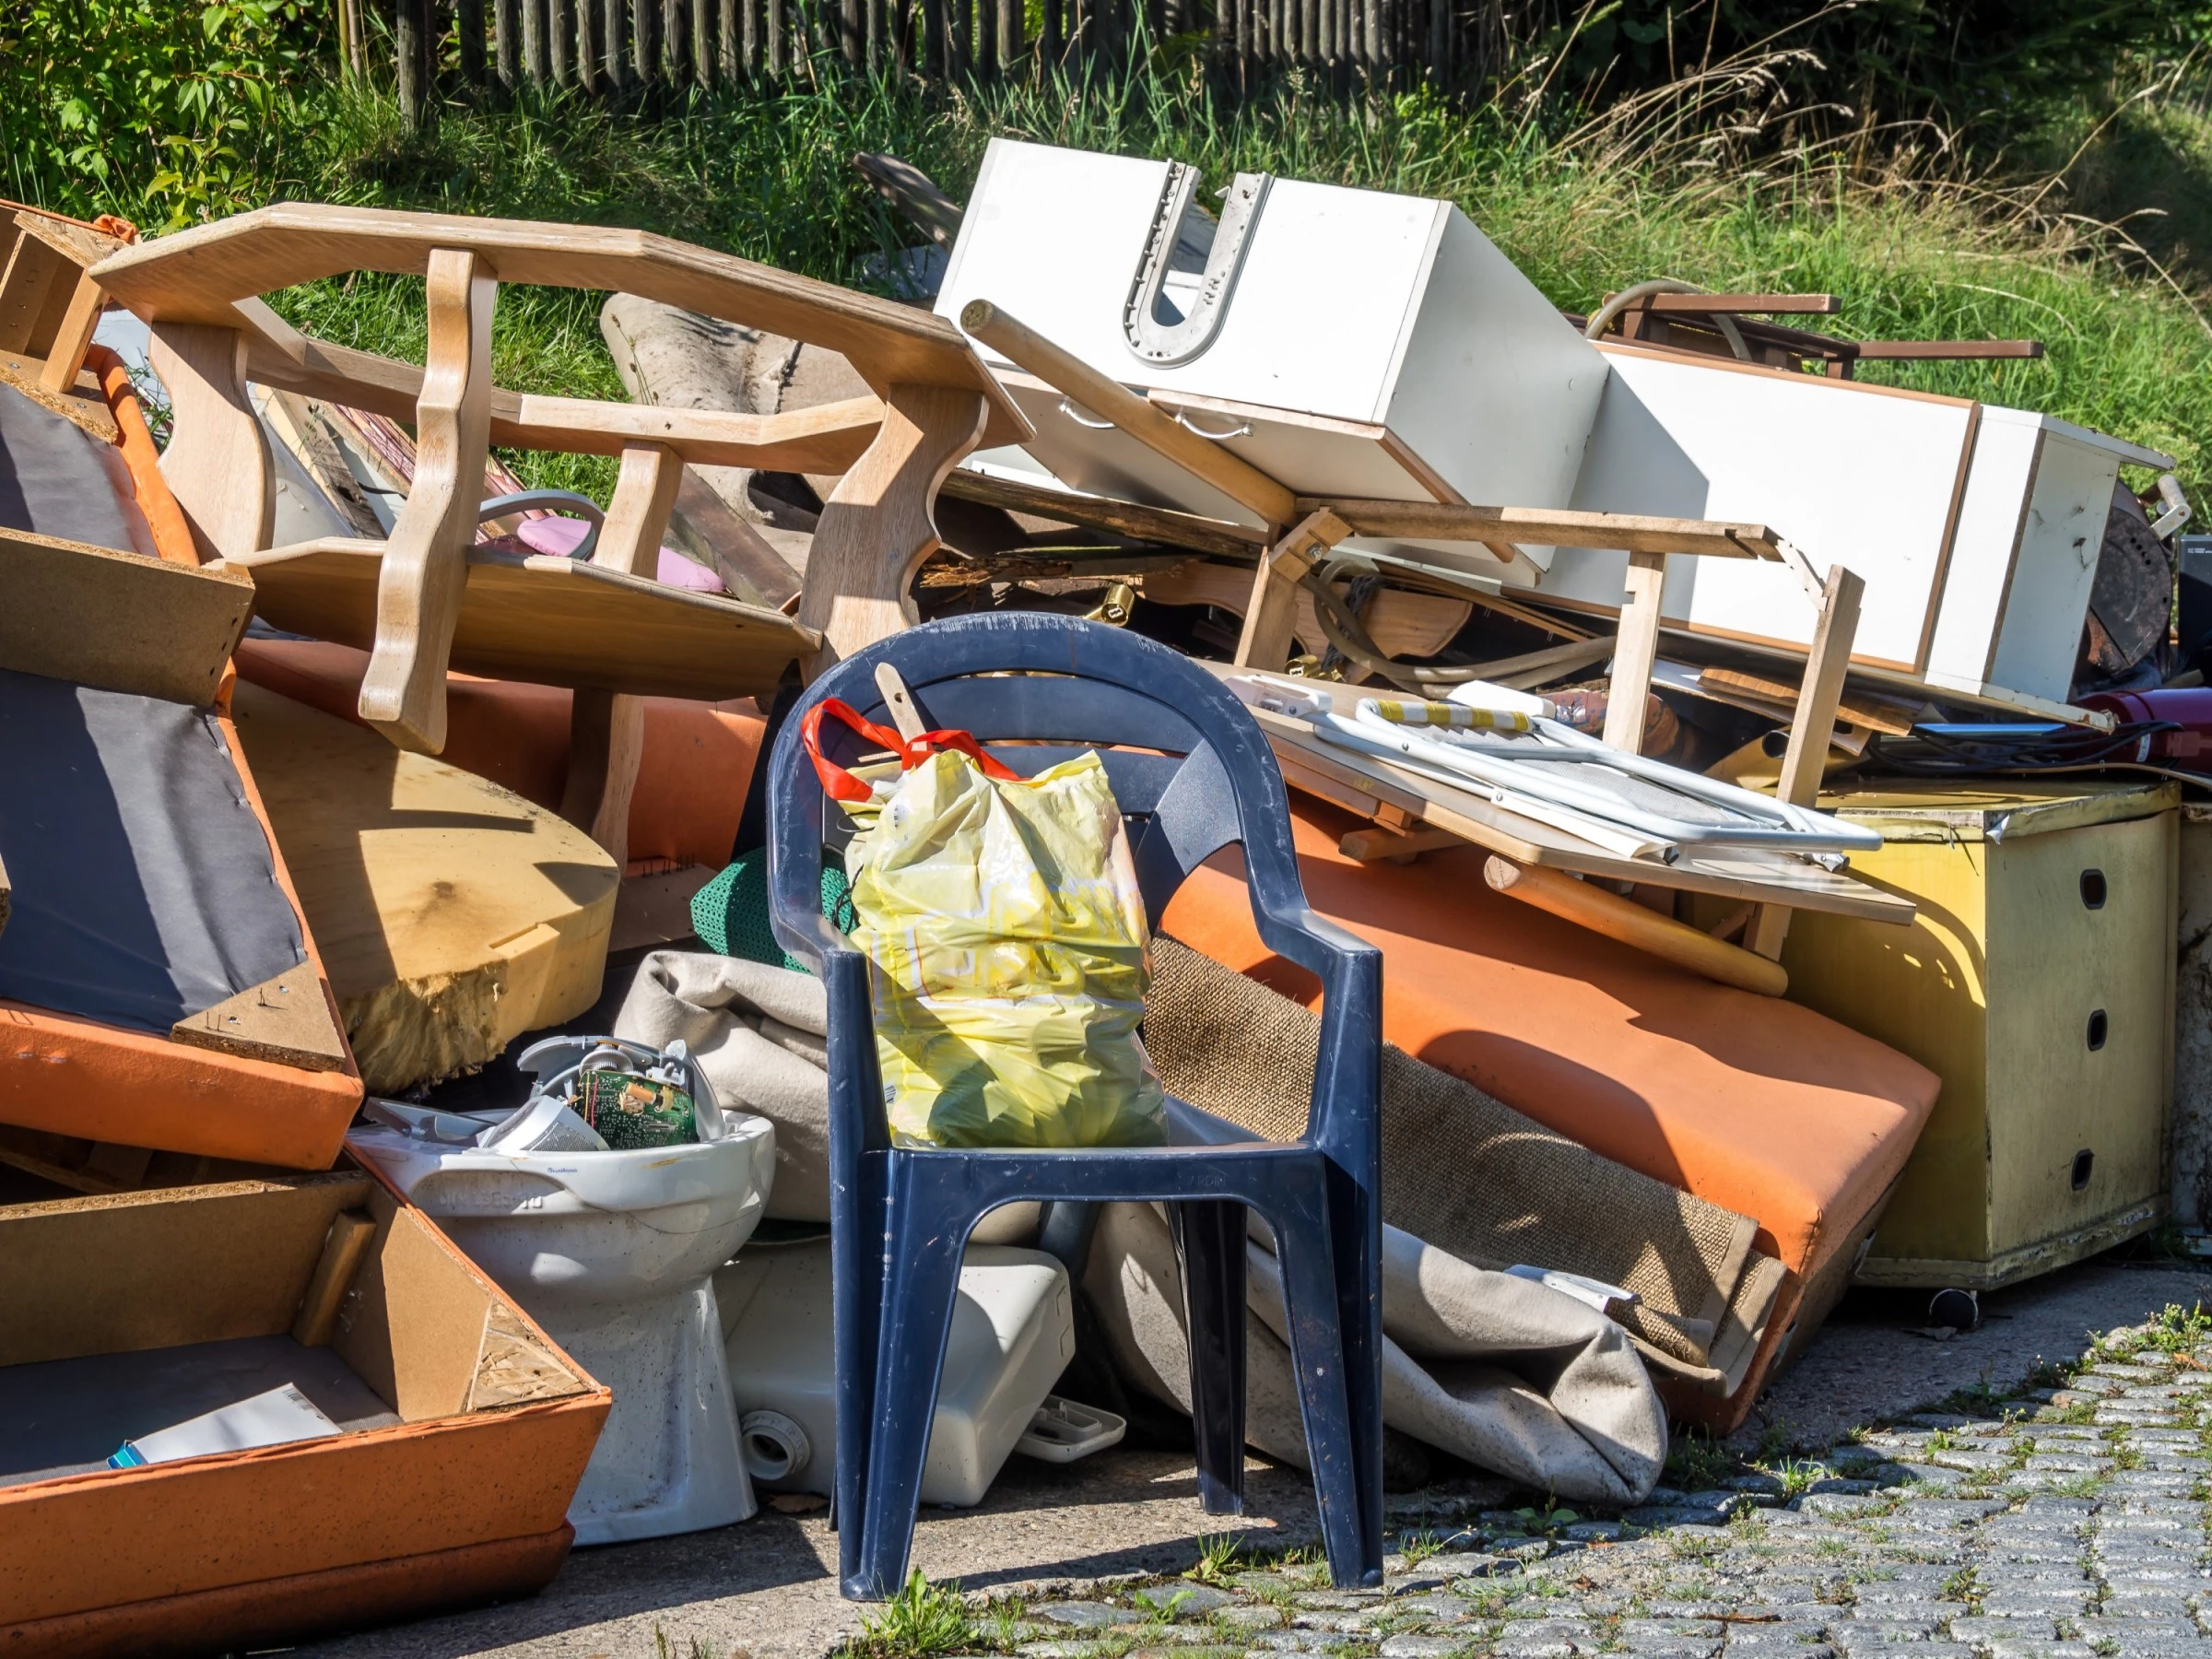 Junk Removal Mississauga: Top-Rated Service for Hassle-Free Solutions